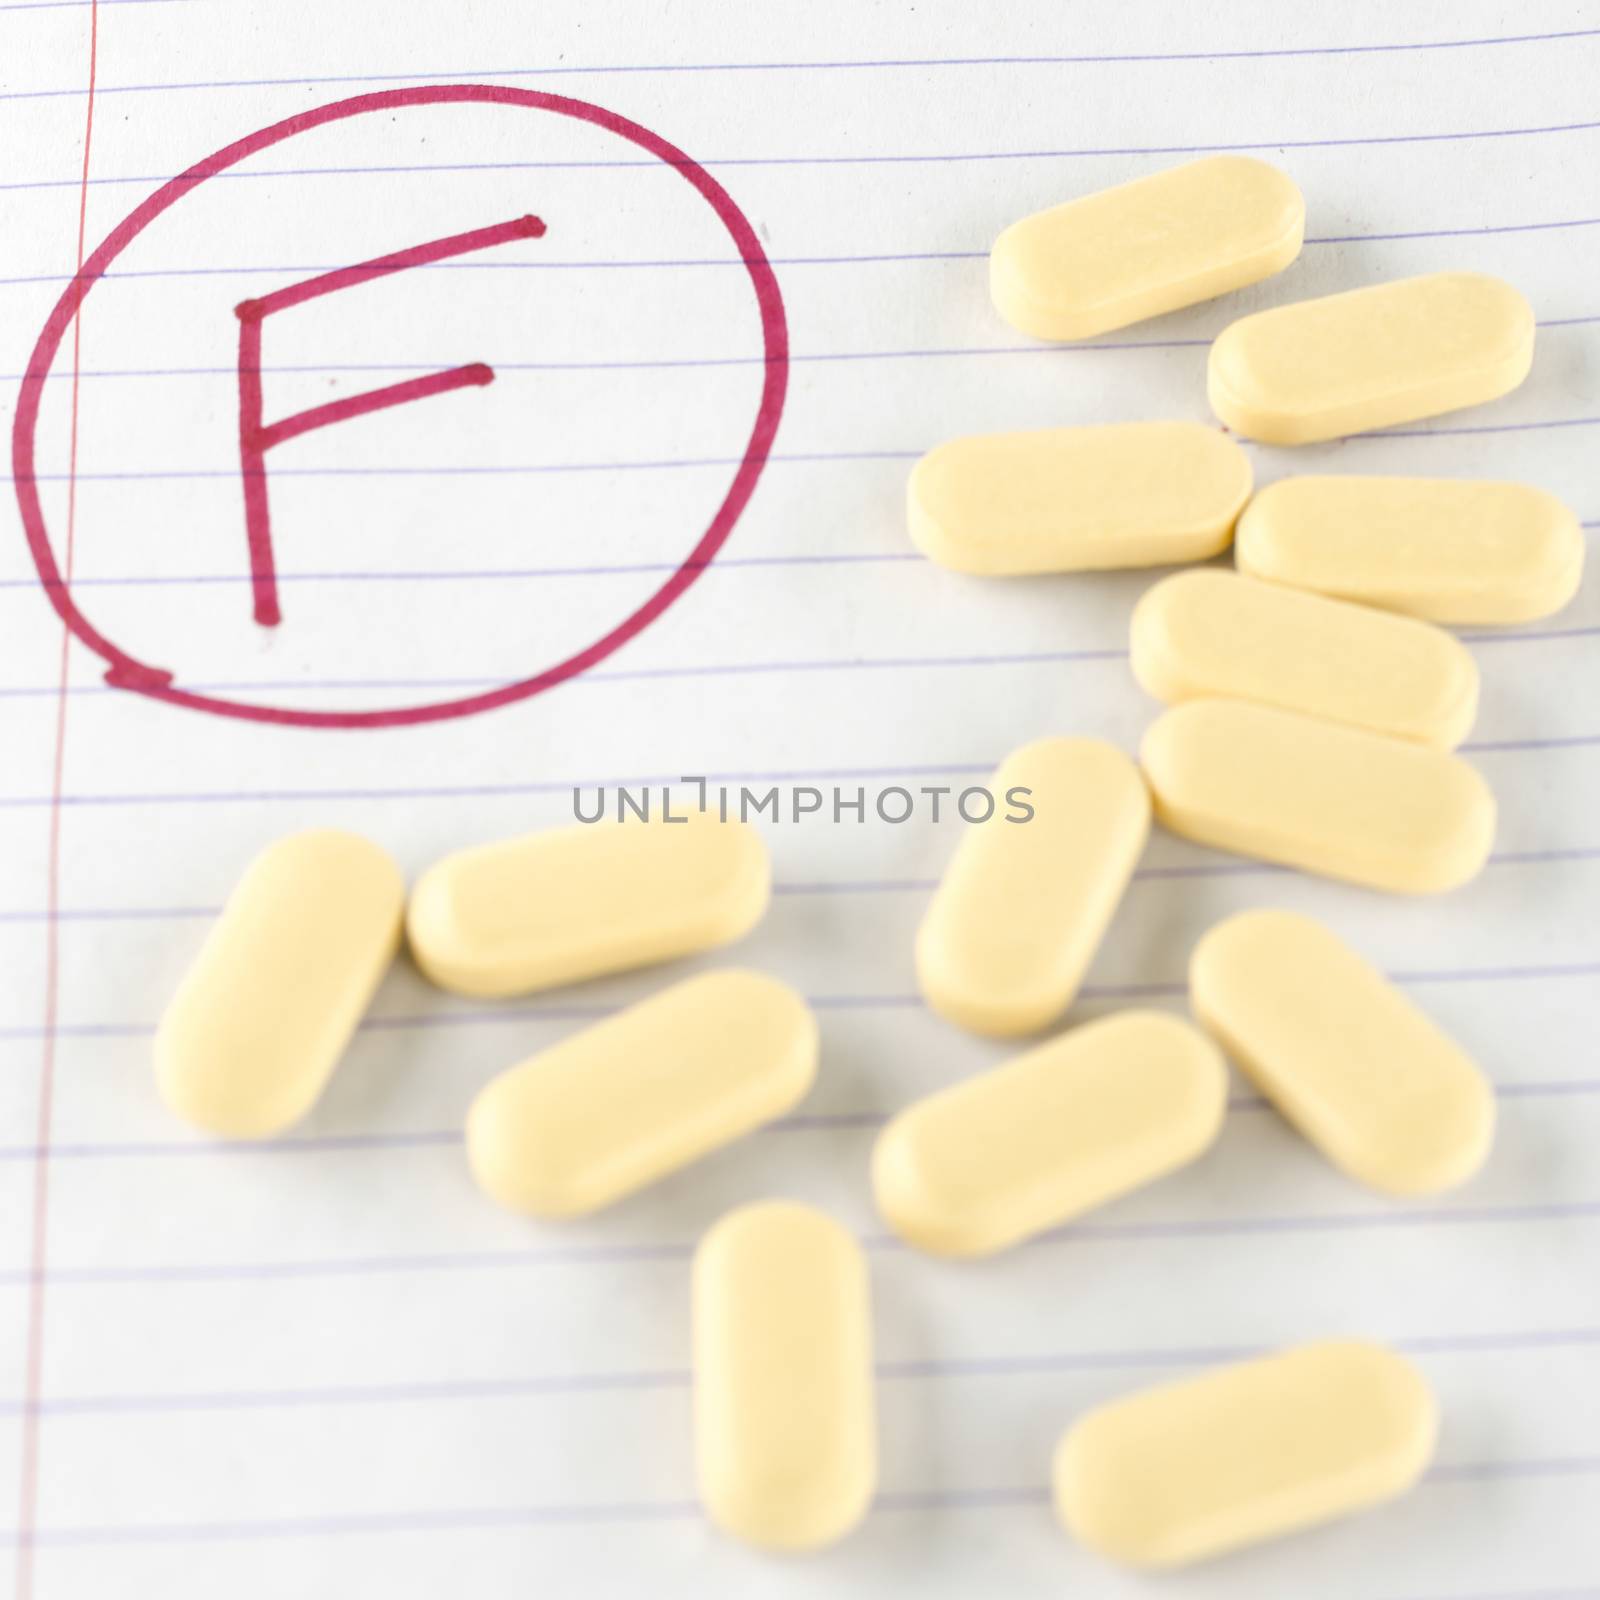 grade f with drug concept are nervous